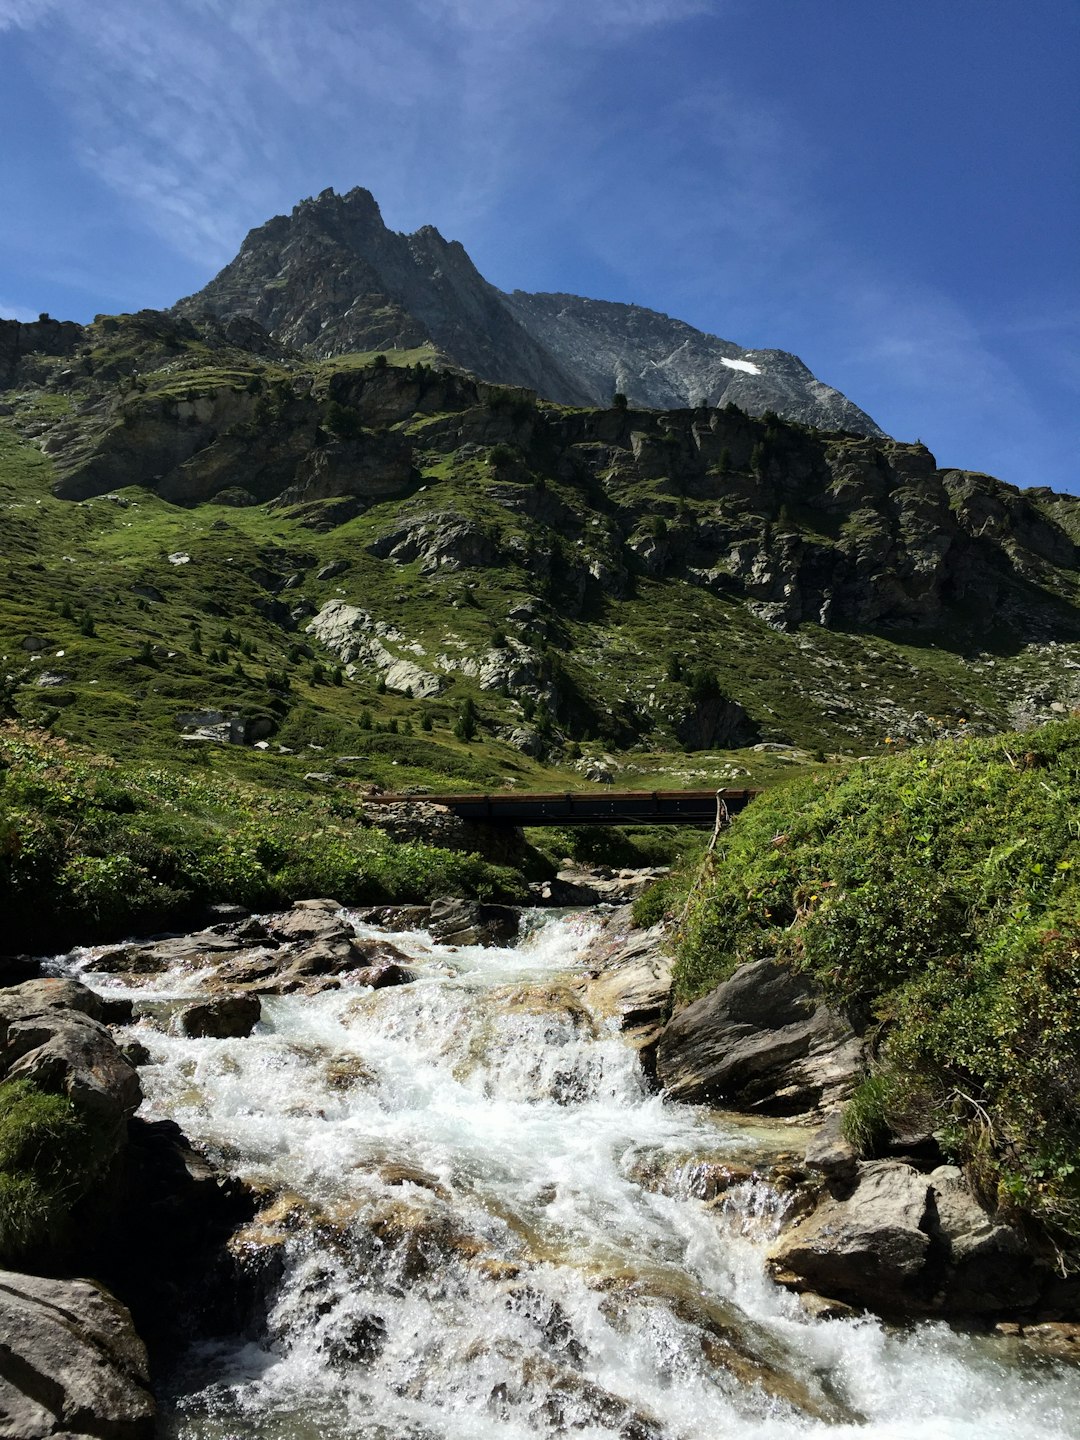 Travel Tips and Stories of Parc national de la Vanoise in France